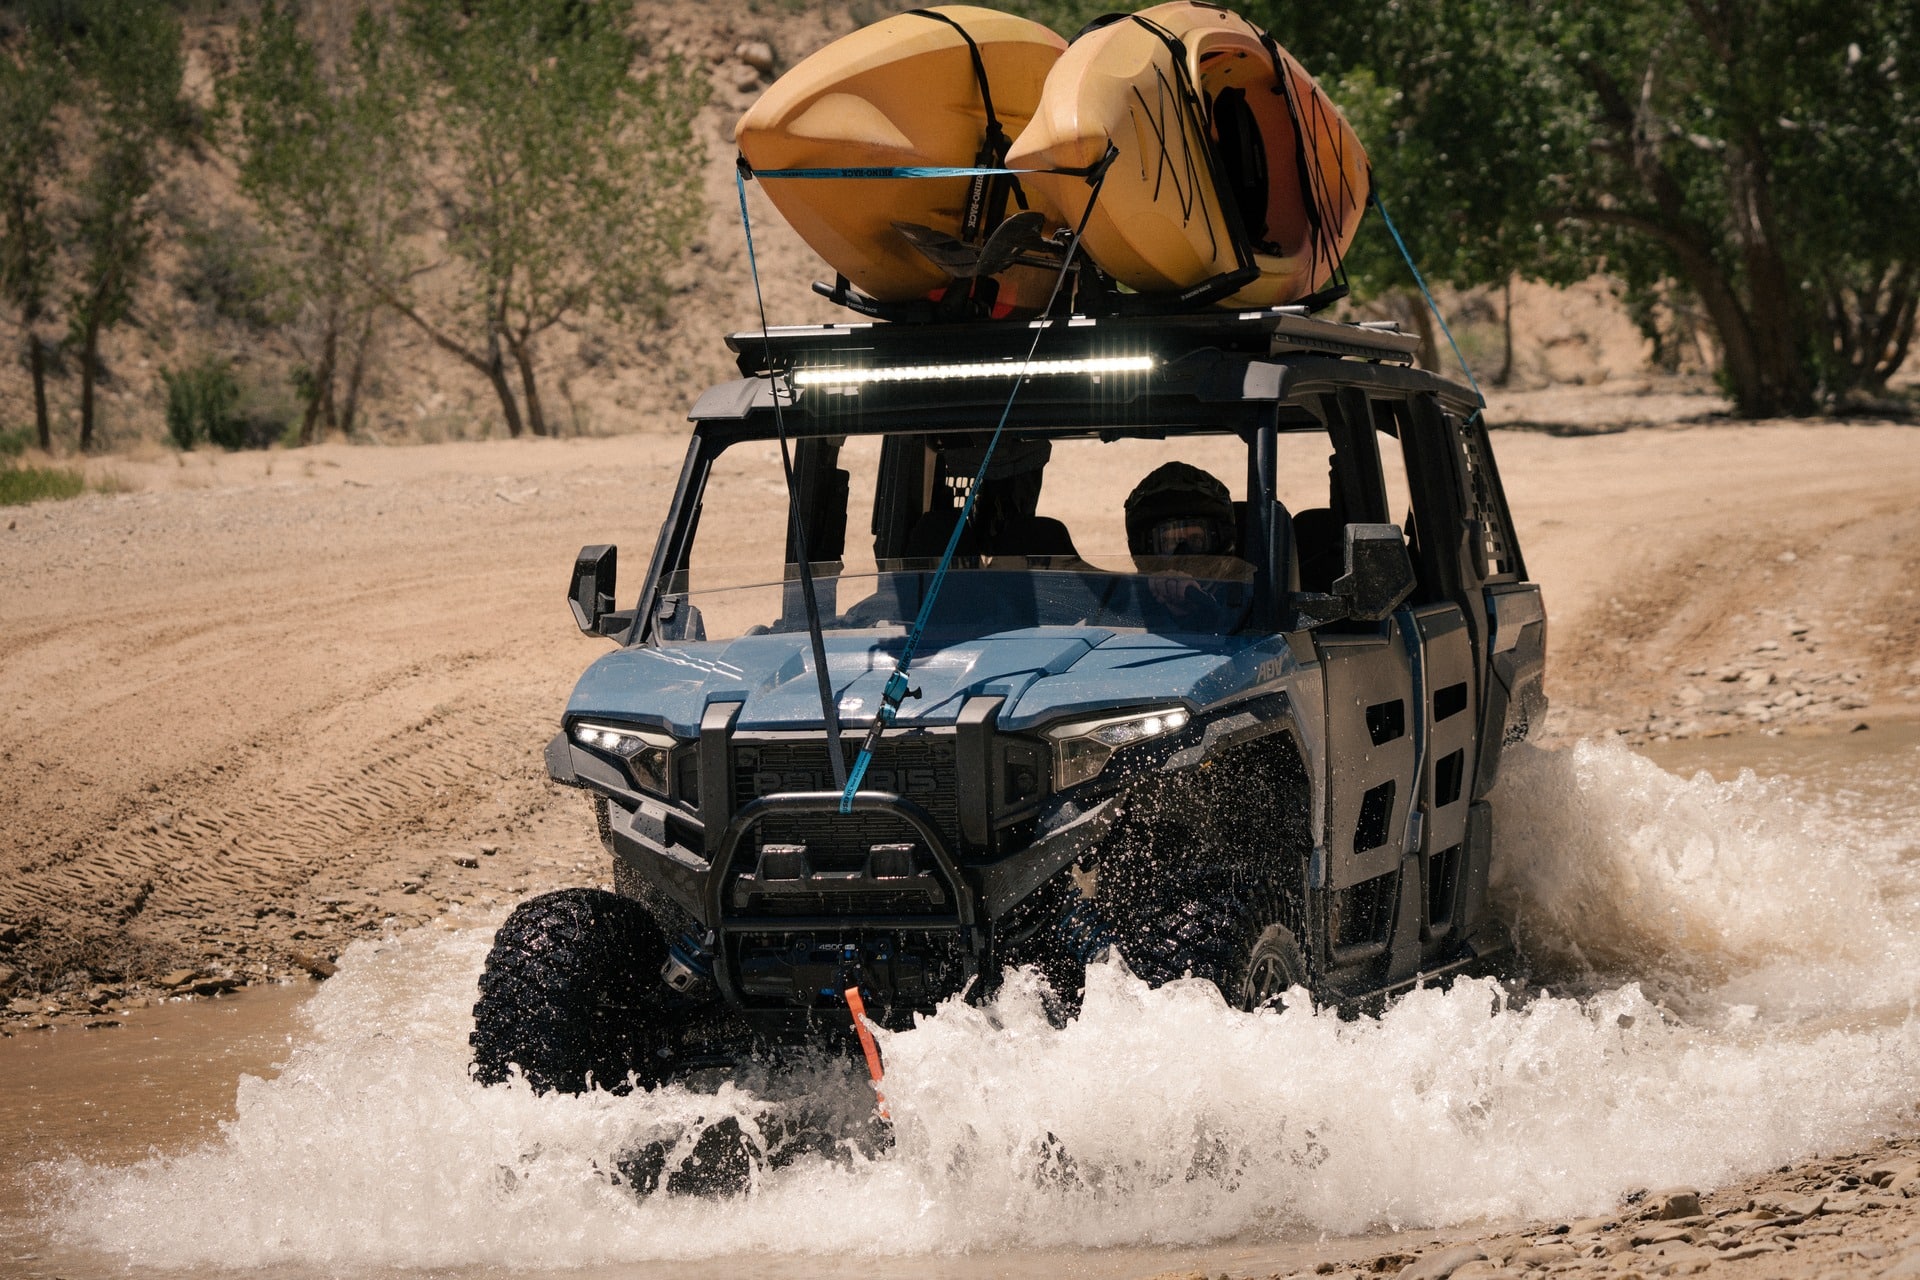 A Polaris Xpedition driving through the water.